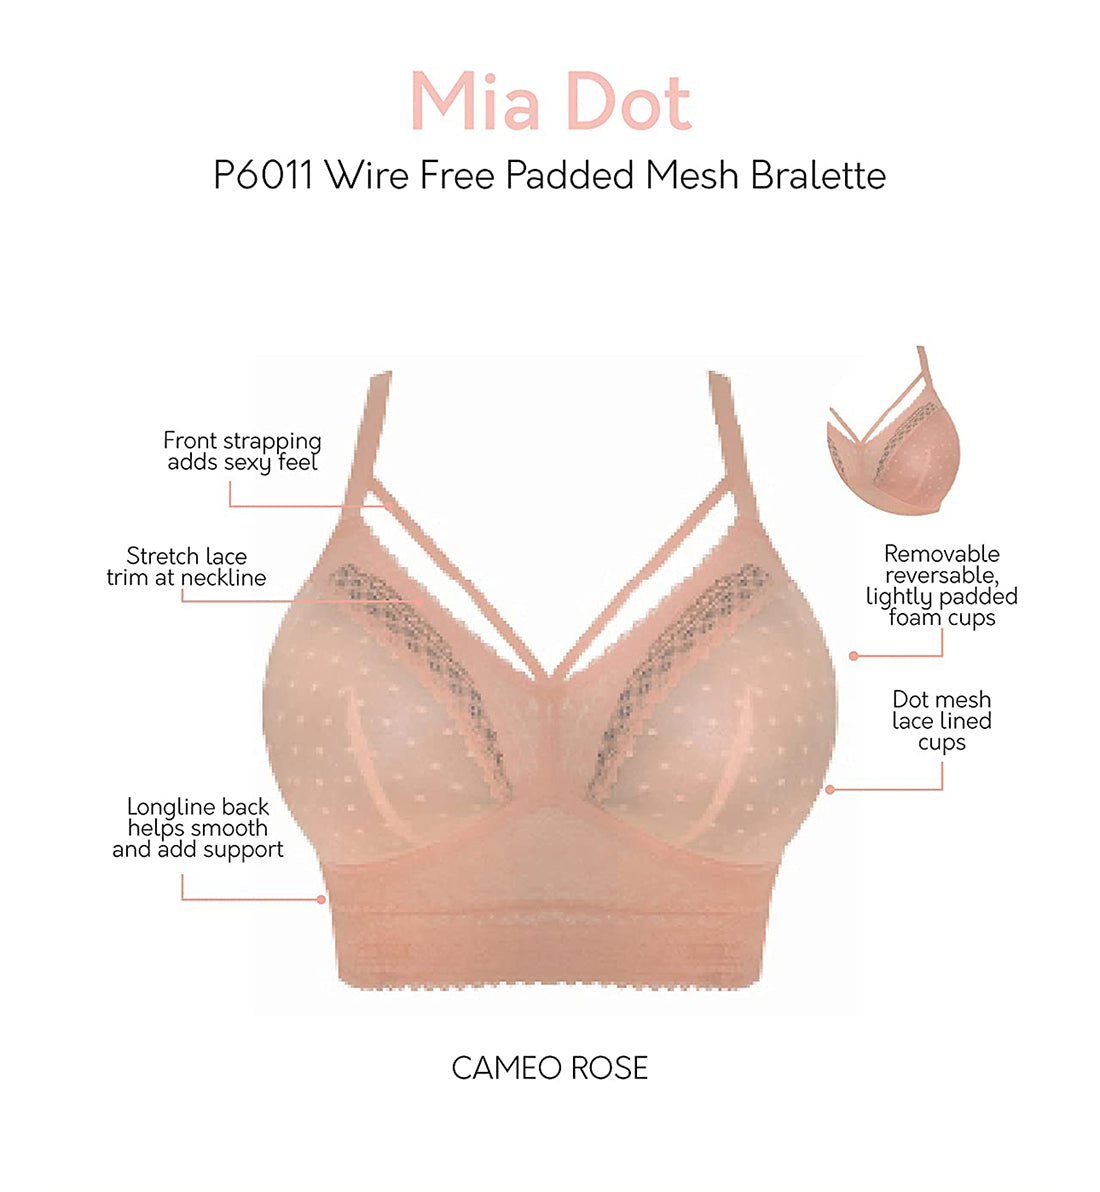 Parfait Mia Dot Wire-Free Padded Mesh Bralette (P6011),30D,Cameo Rose - Cameo Rose,30D